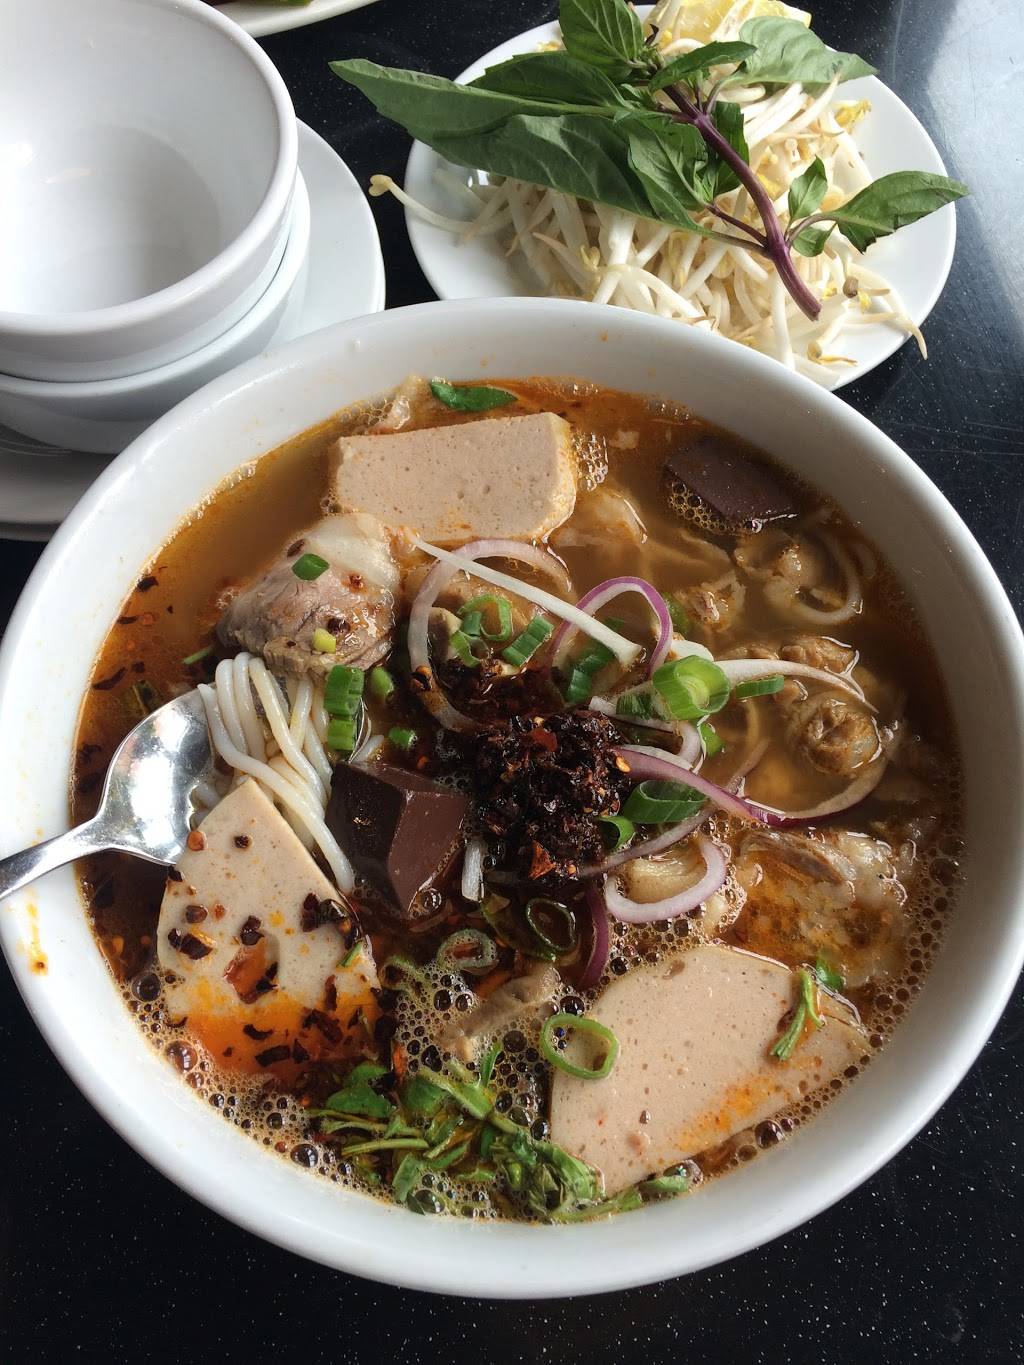 New Thanh Hoai | restaurant | 234 10th St, Jersey City, NJ 07302, USA | 2019186599 OR +1 201-918-6599